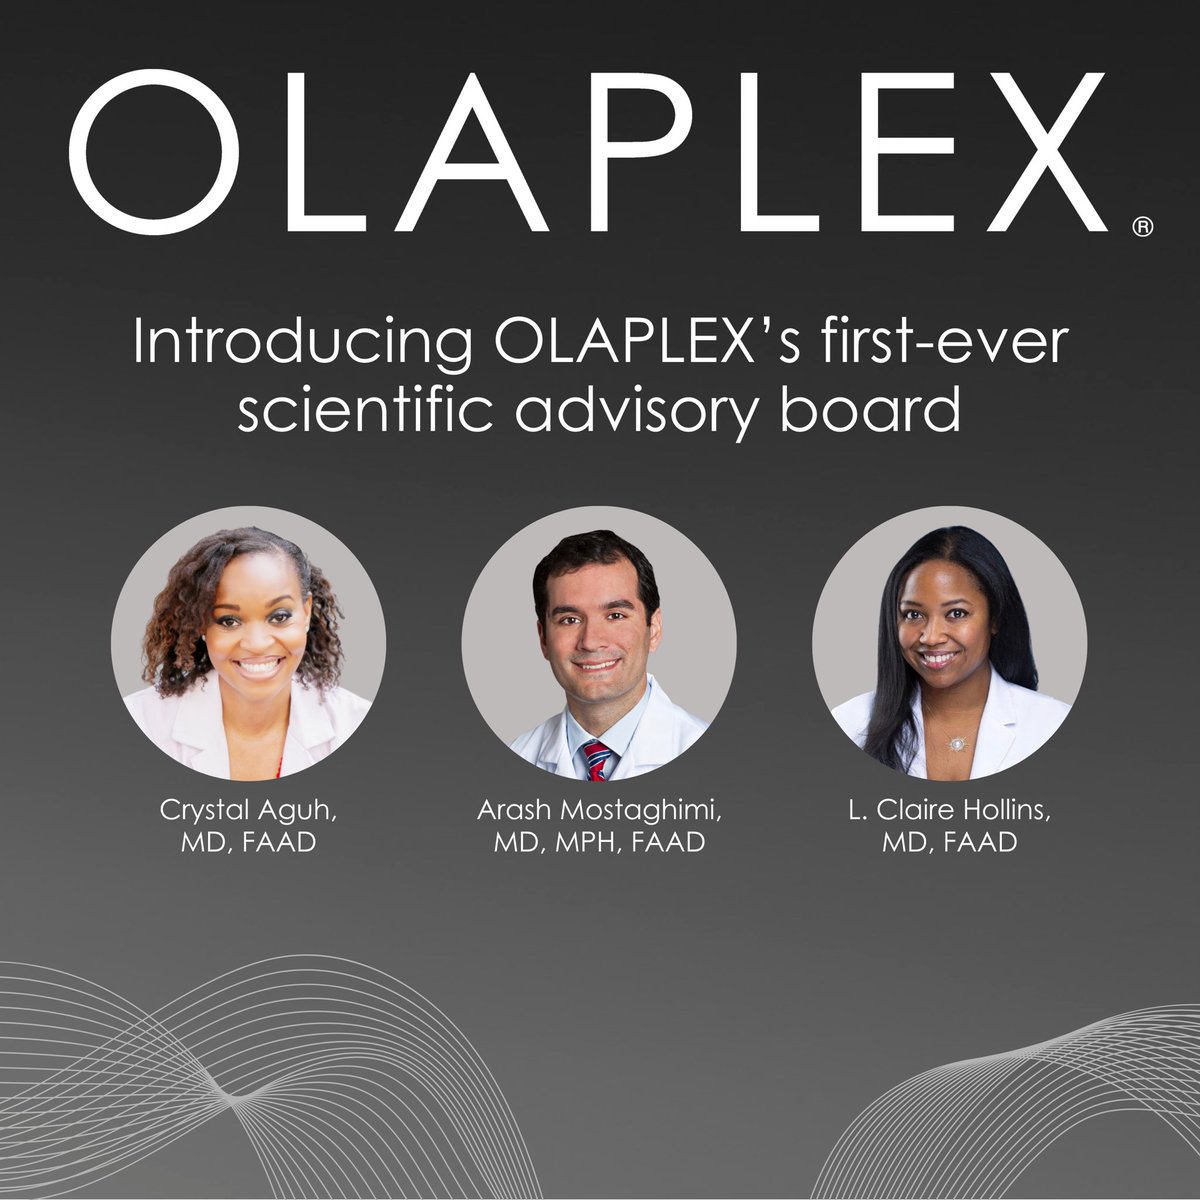 Meet #OLAPLEX’s first-ever scientific advisory board! 👩‍🔬👨‍🏫 🧬 The OLAPLEX Scientific Advisory board is a group of leading experts in dermatology. 🔬 Look forward to seeing more educational content while we work towards the goal of improving hair health through hair science!